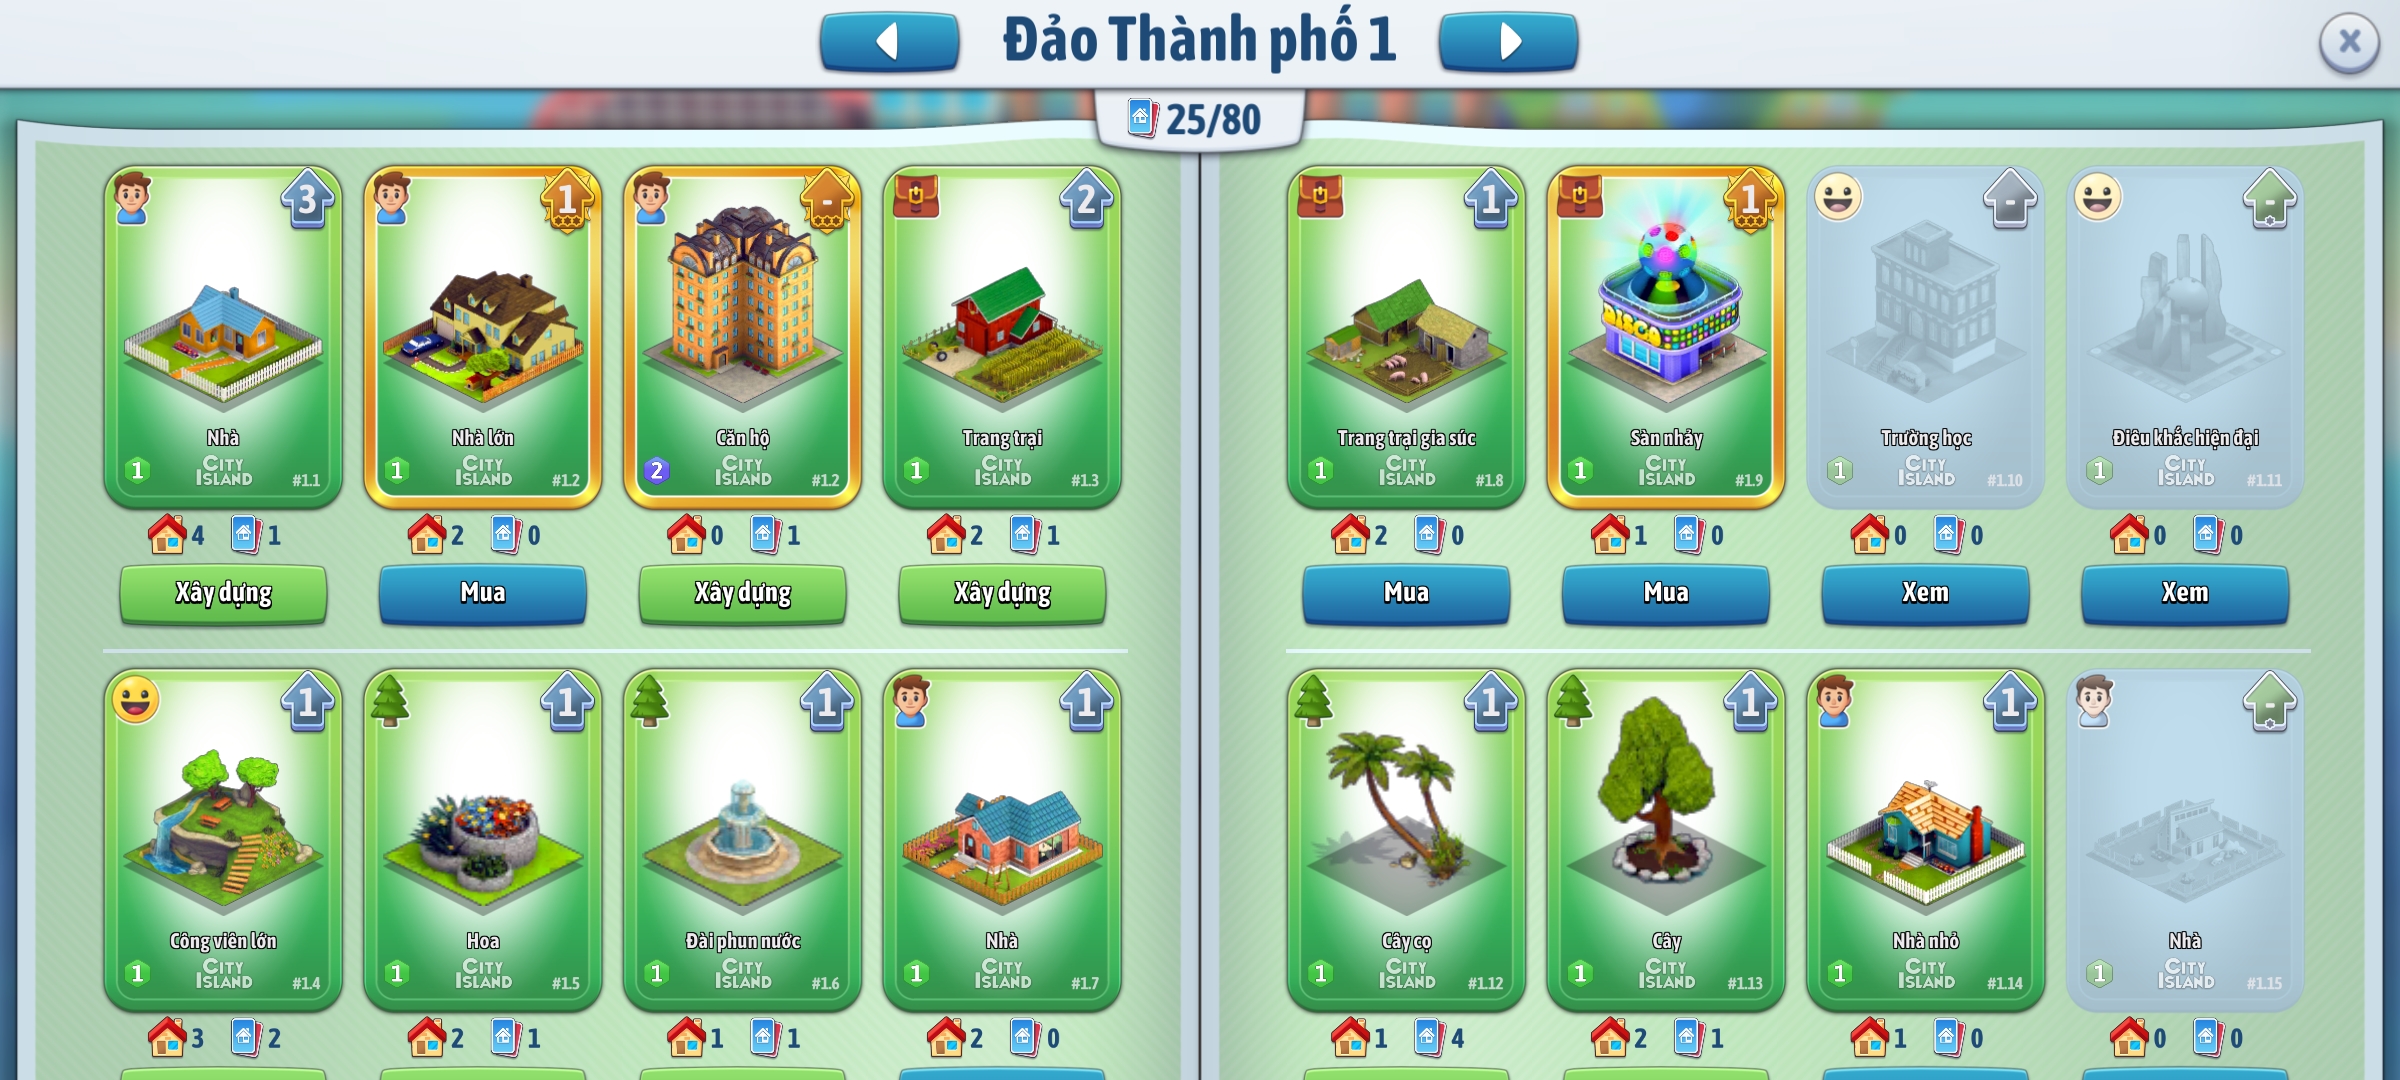 [Game Android] City Island: Collections Game Tiếng Việt